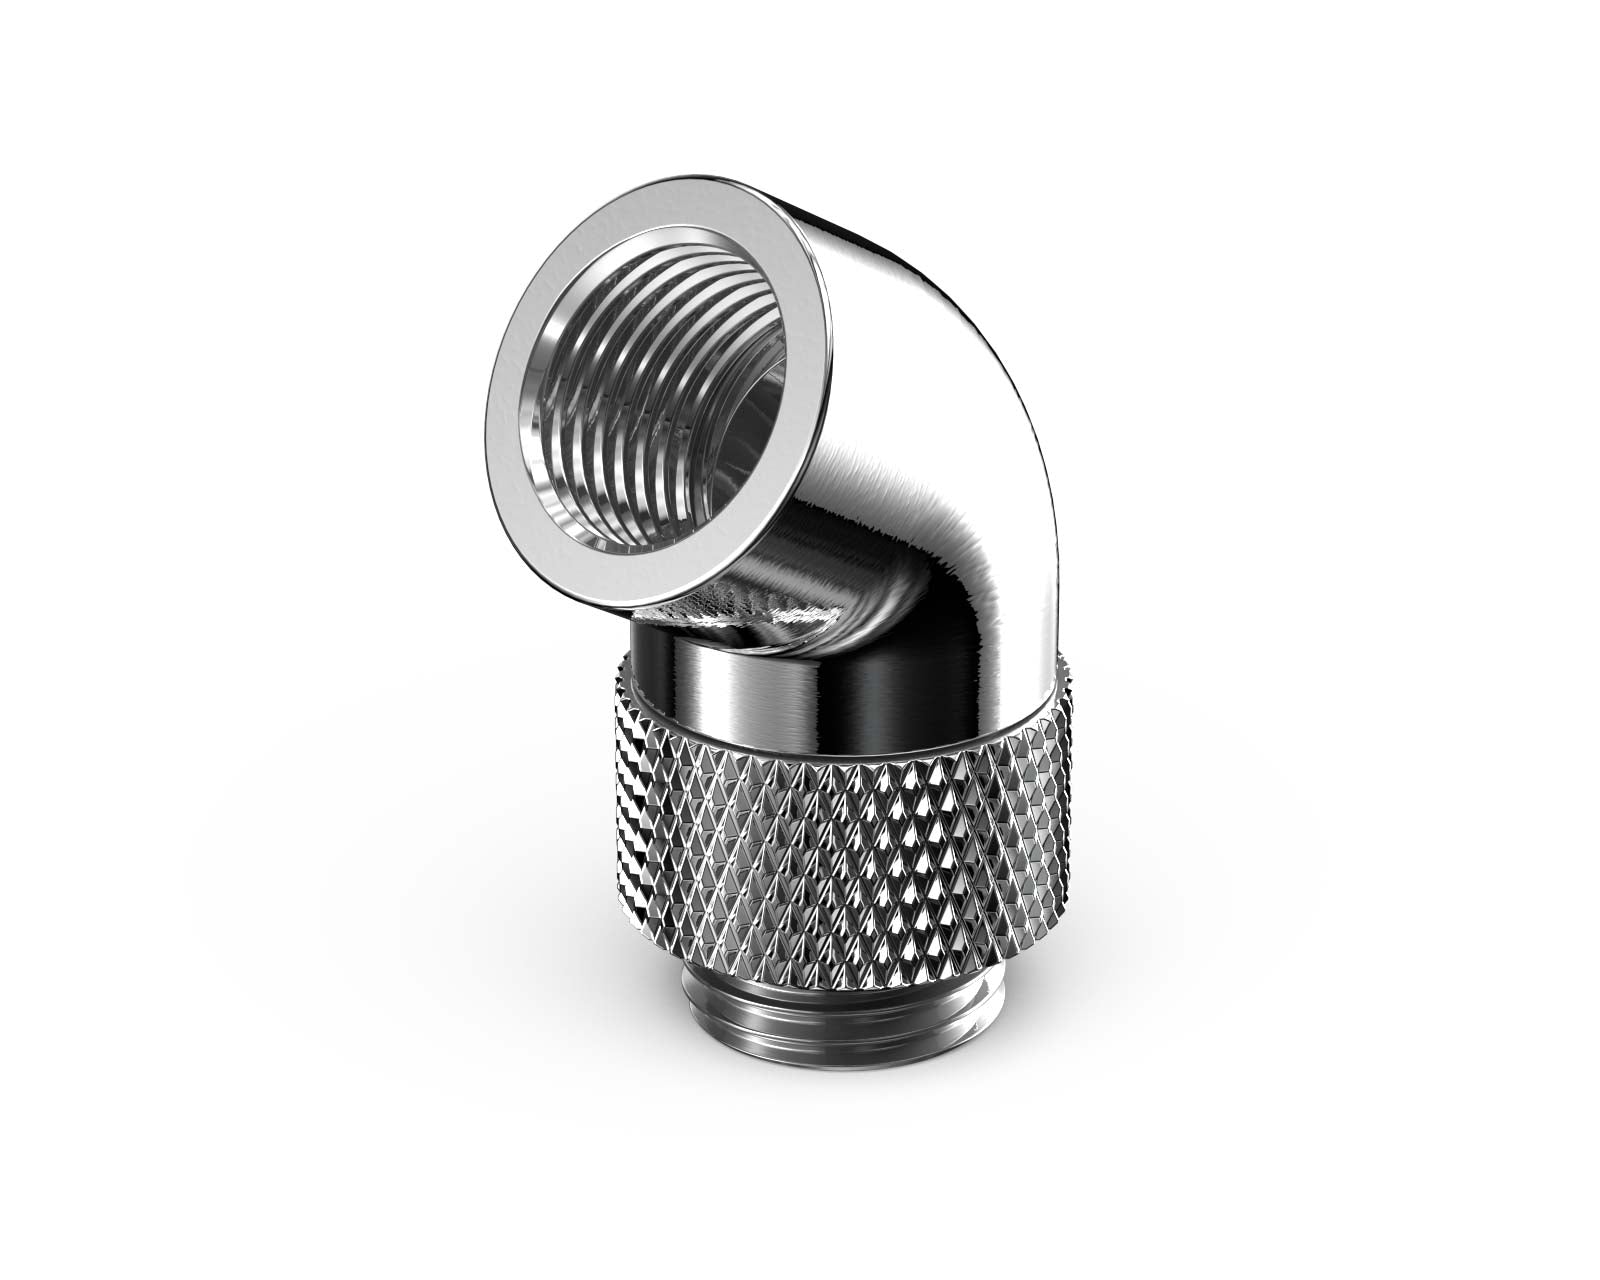 PrimoChill Male to Female G 1/4in. 60 Degree SX Rotary Elbow Fitting - PrimoChill - KEEPING IT COOL Silver Nickel